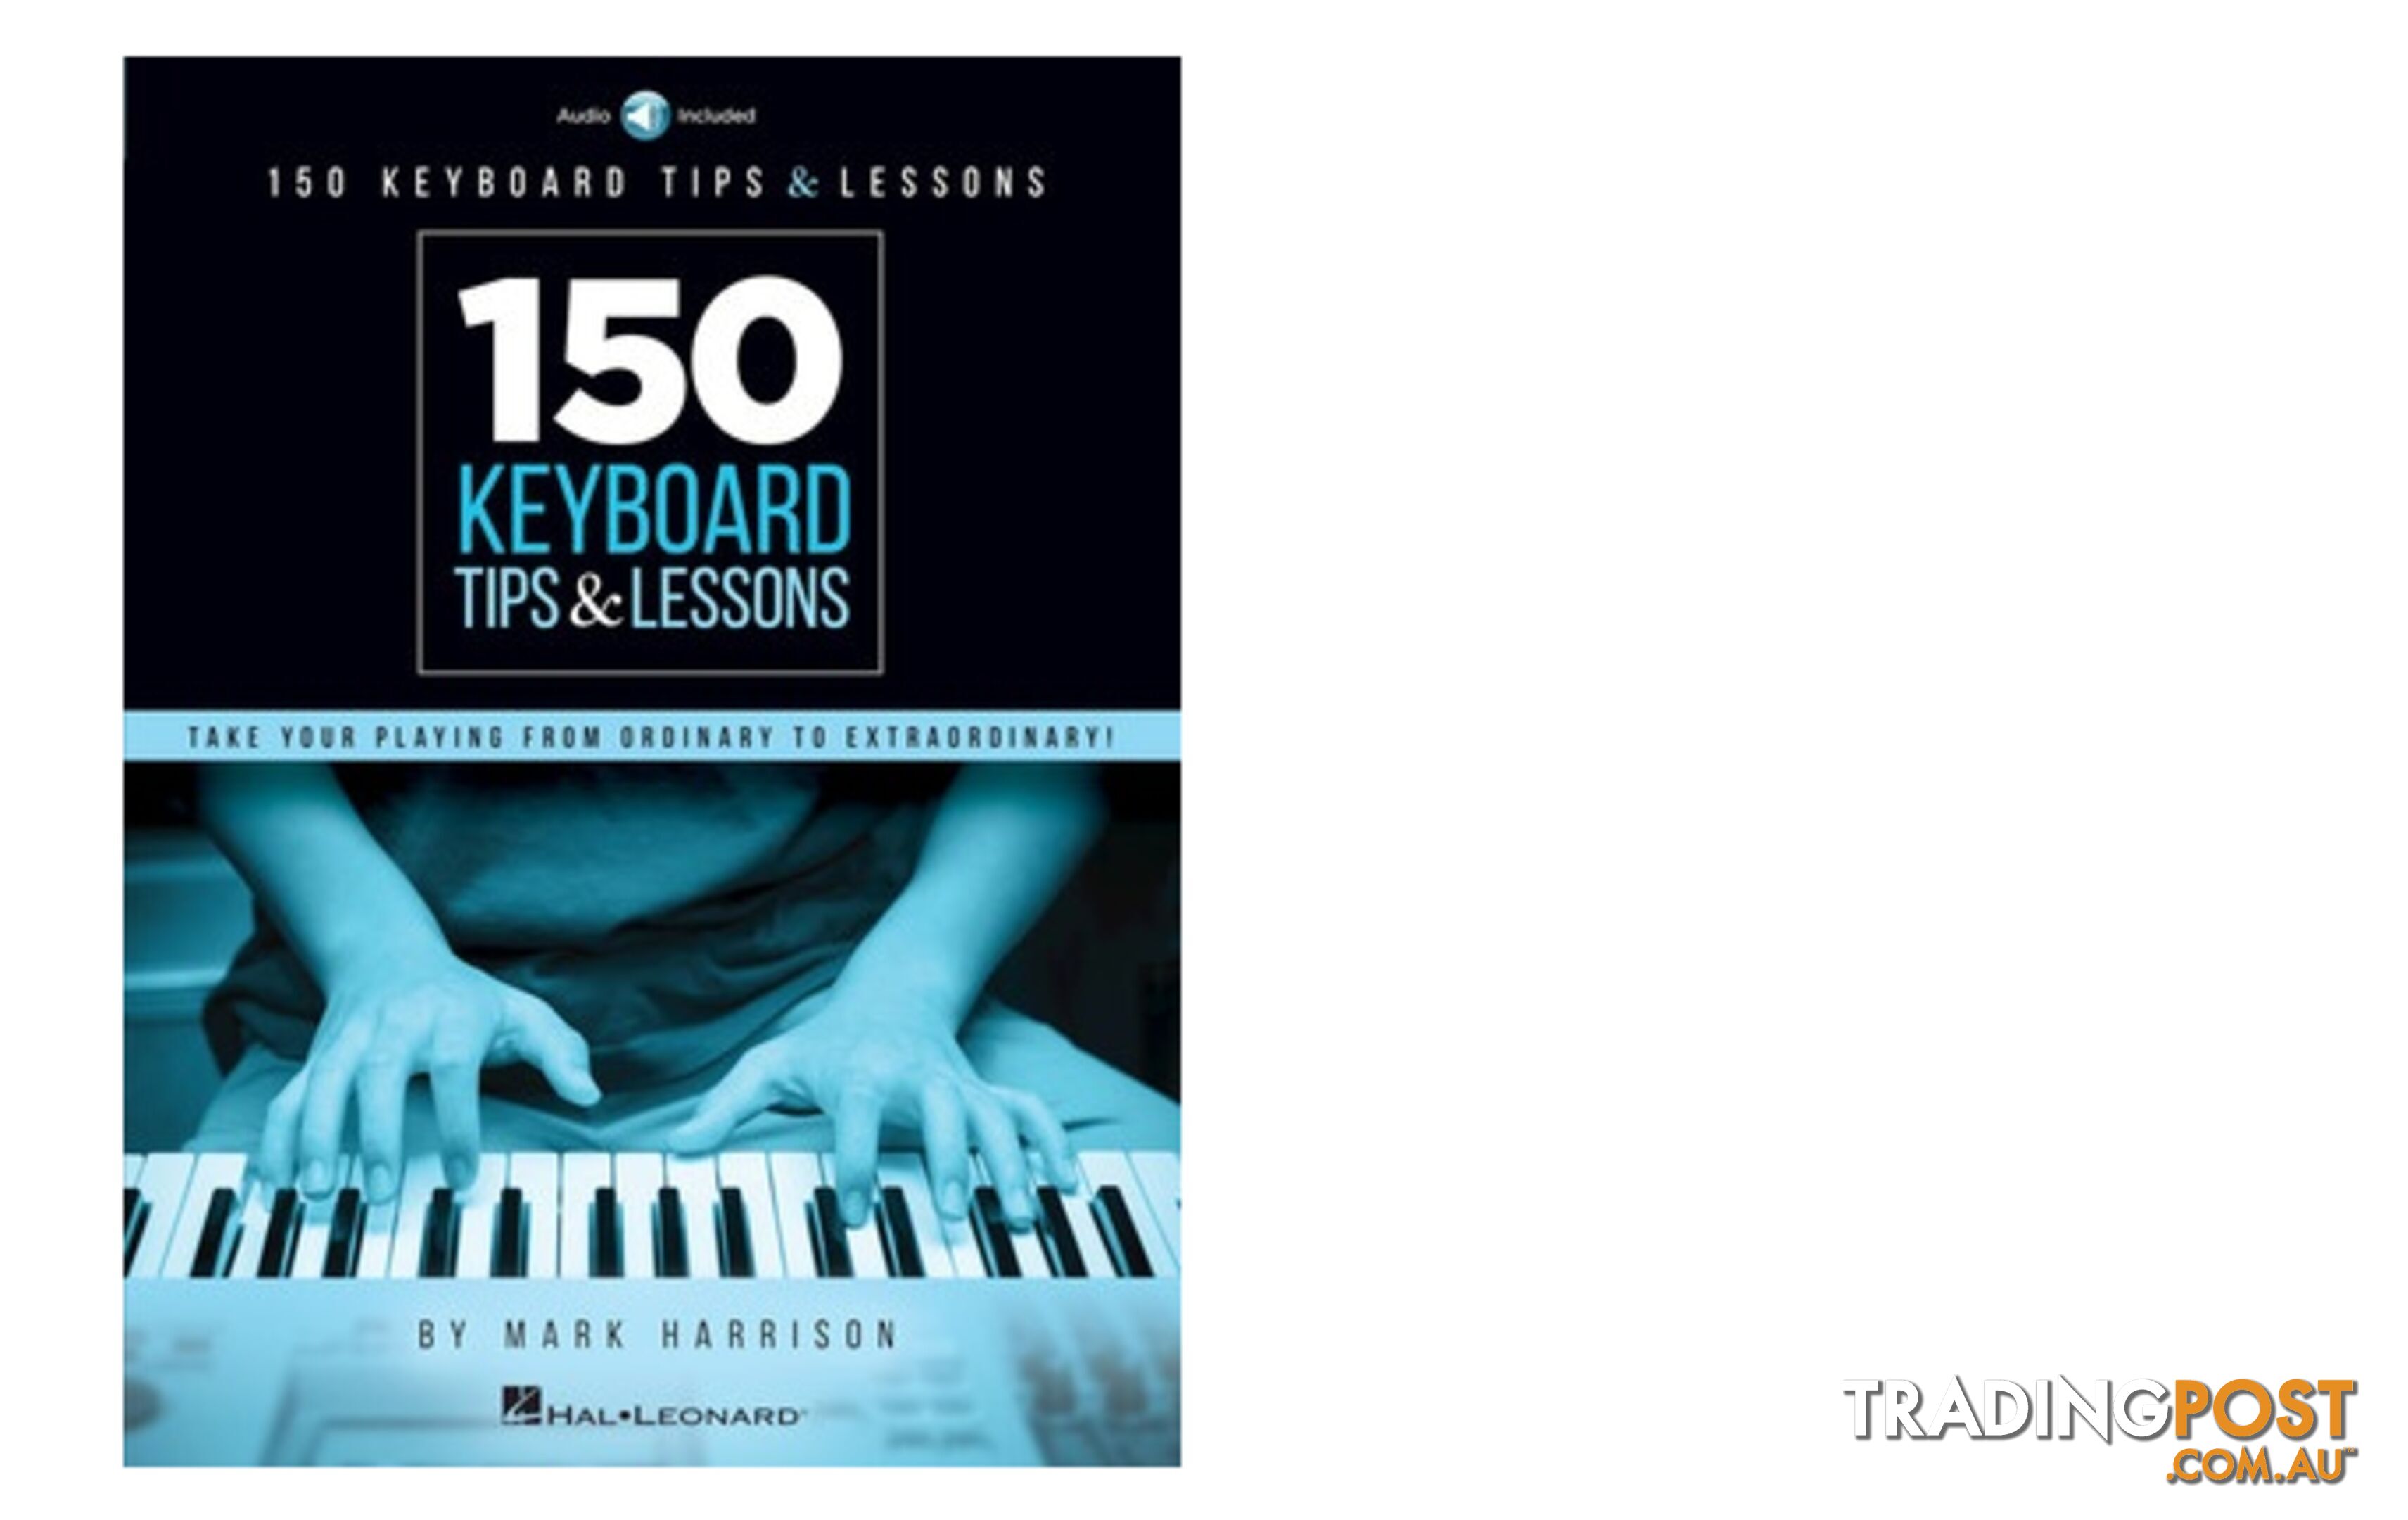 150 Keyboard Tips & Lessons